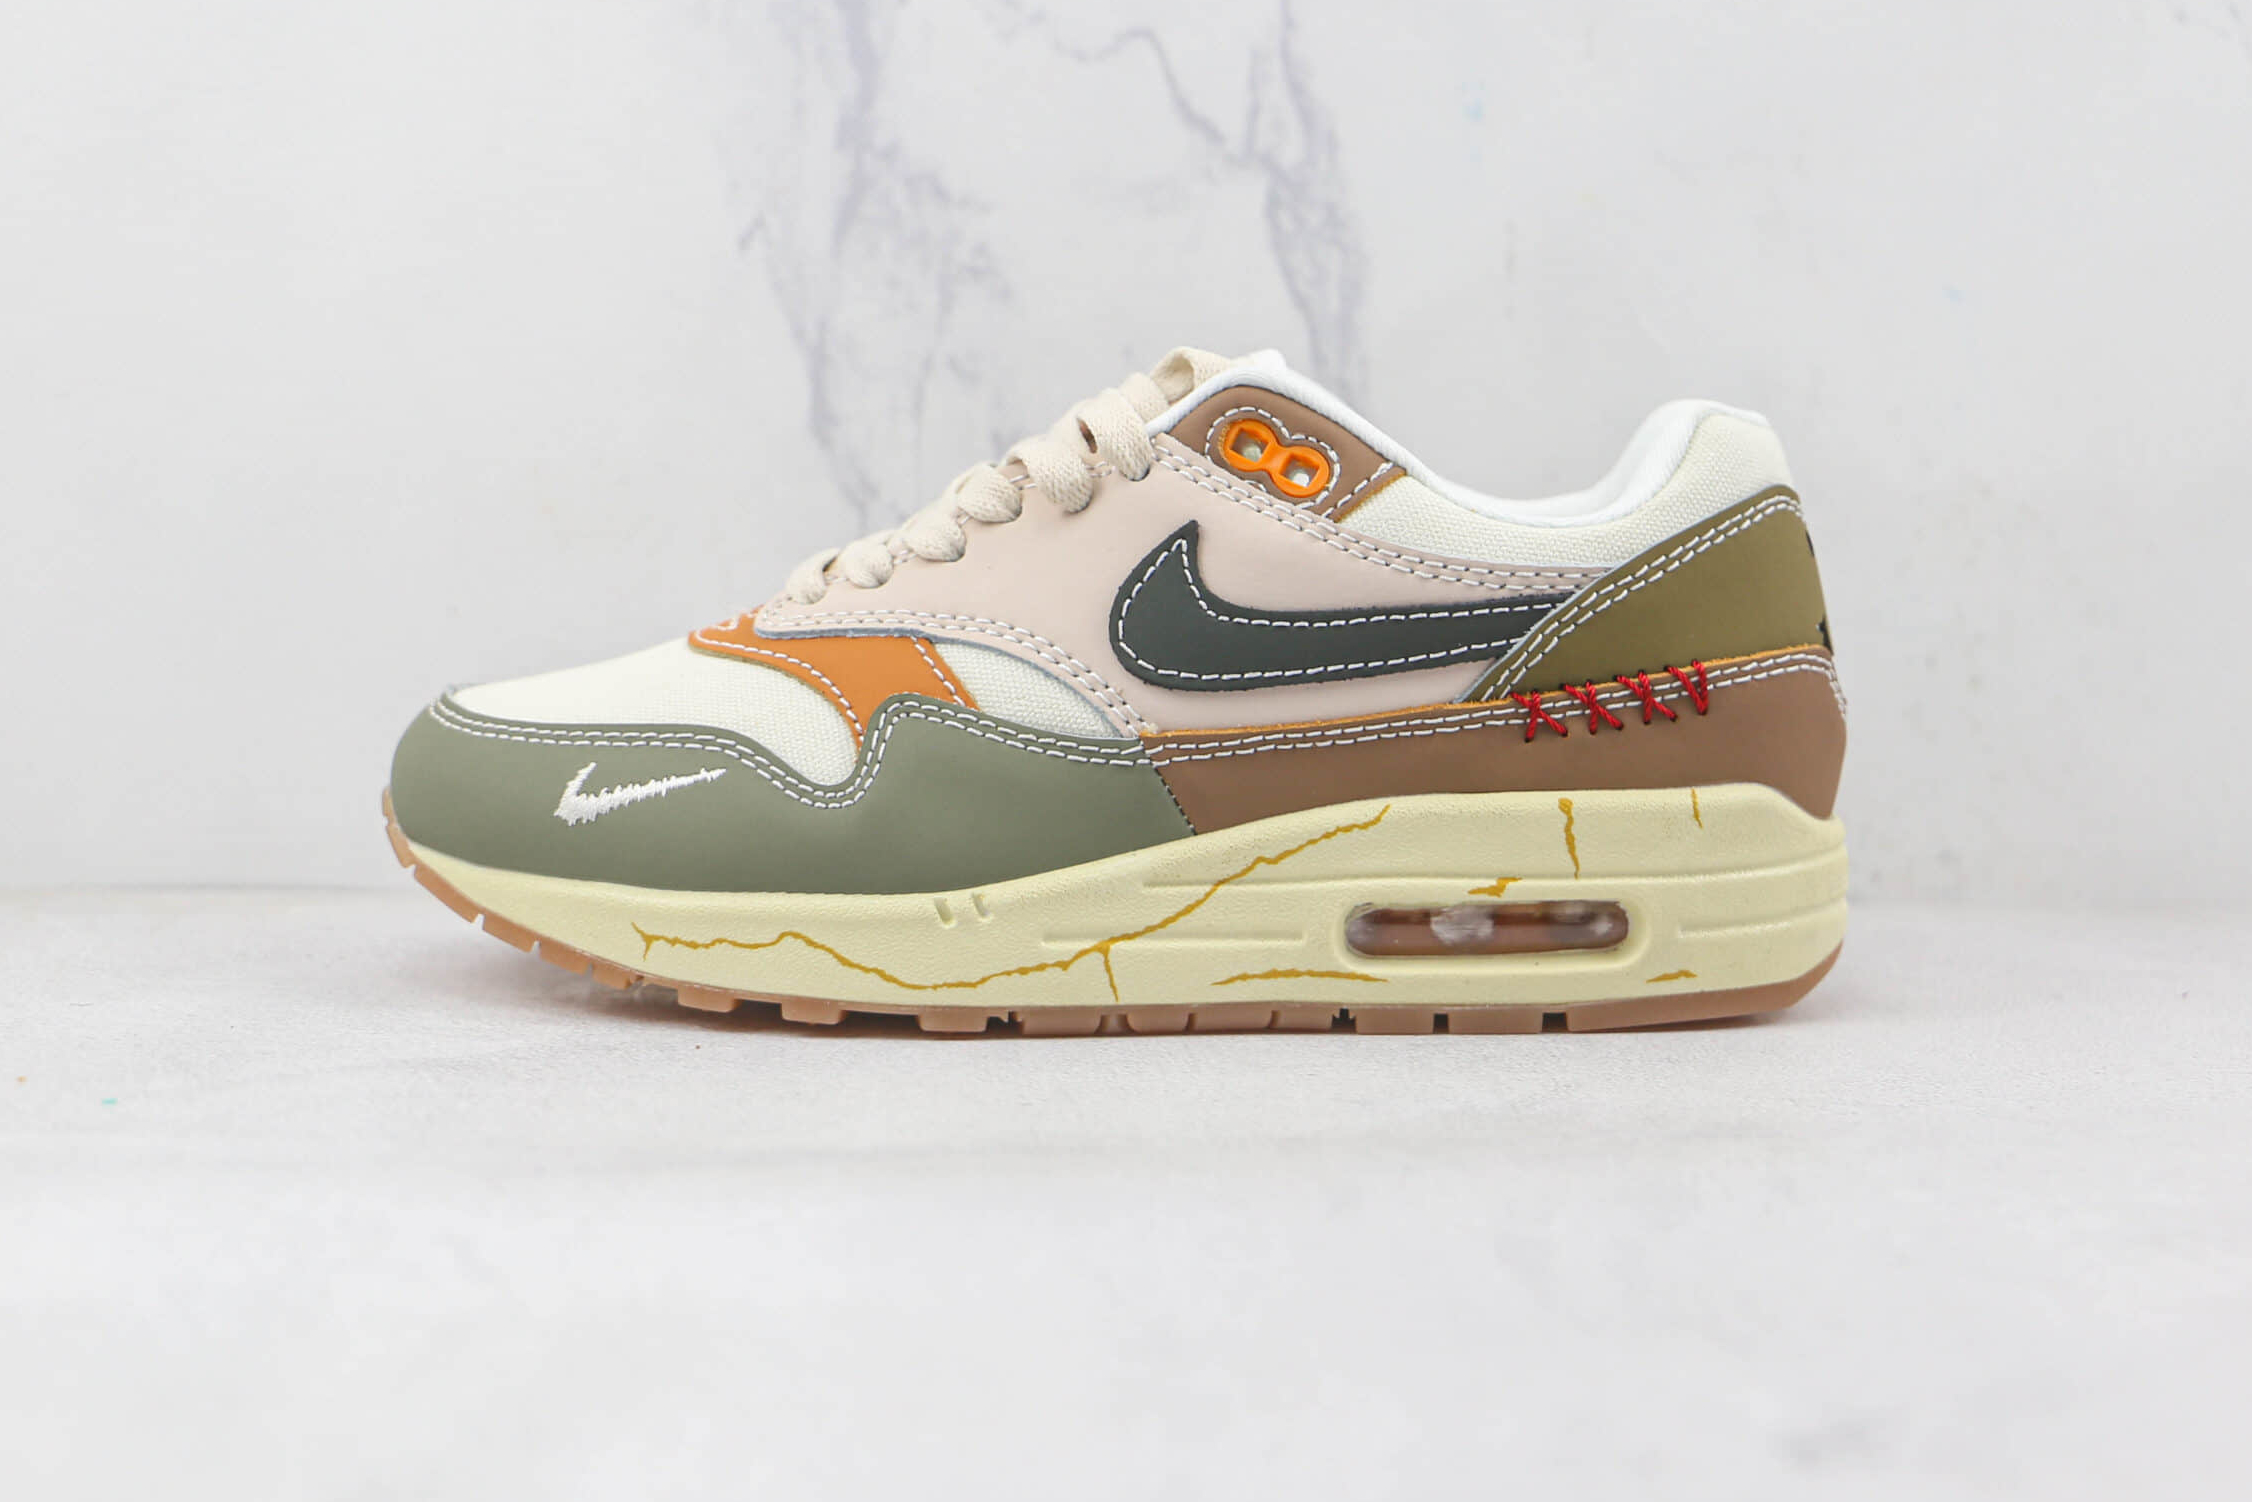 Nike Air Max 1 Premium 'Air Max Day - Wabi-Sabi' DQ8656-133 | Classic Style with Japanese Aesthetic | Limited Edition